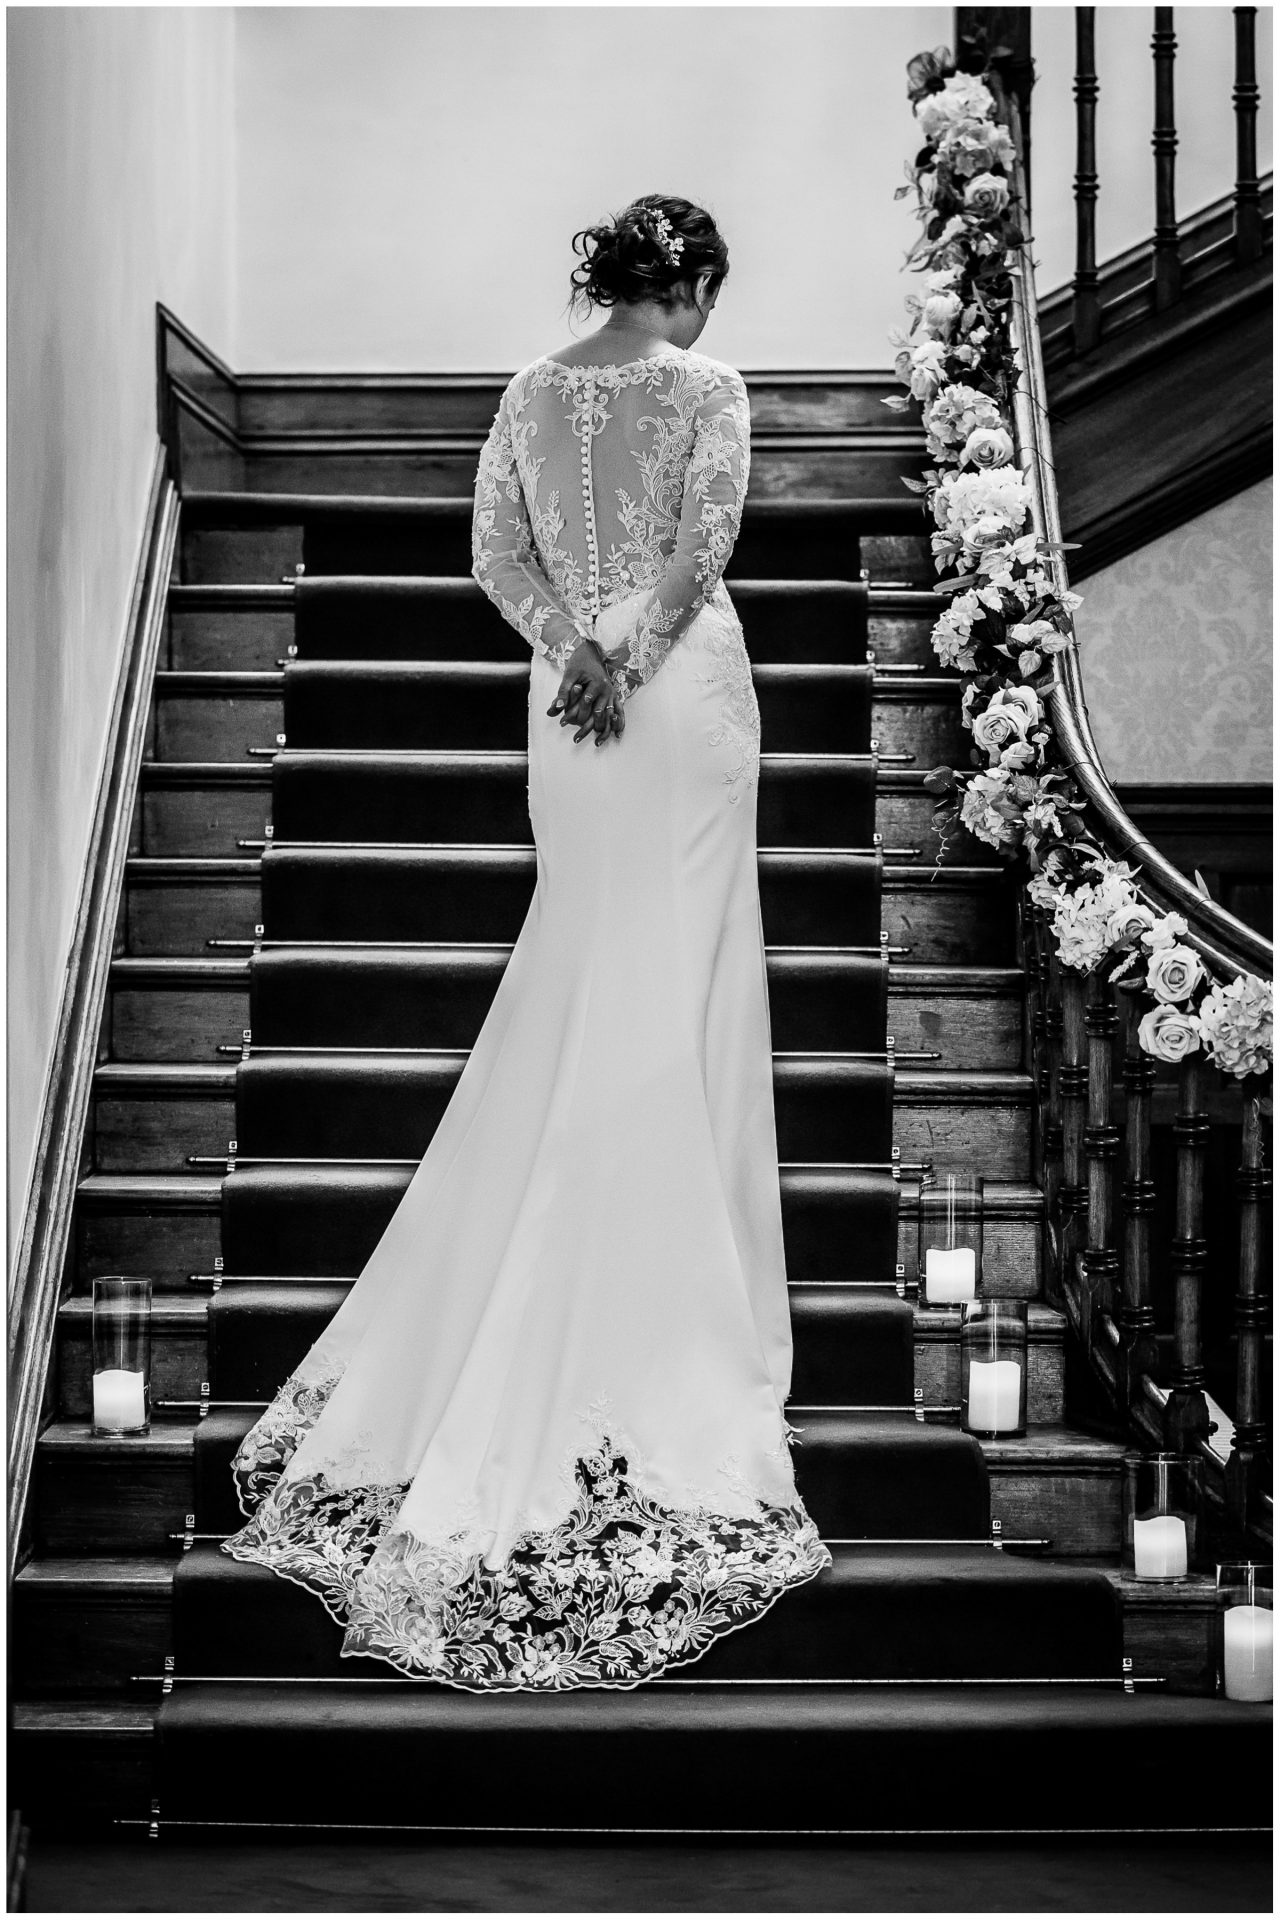 Portrait with detail of the back of the bride's dress on staircase in Hampshire manor house wedding venue